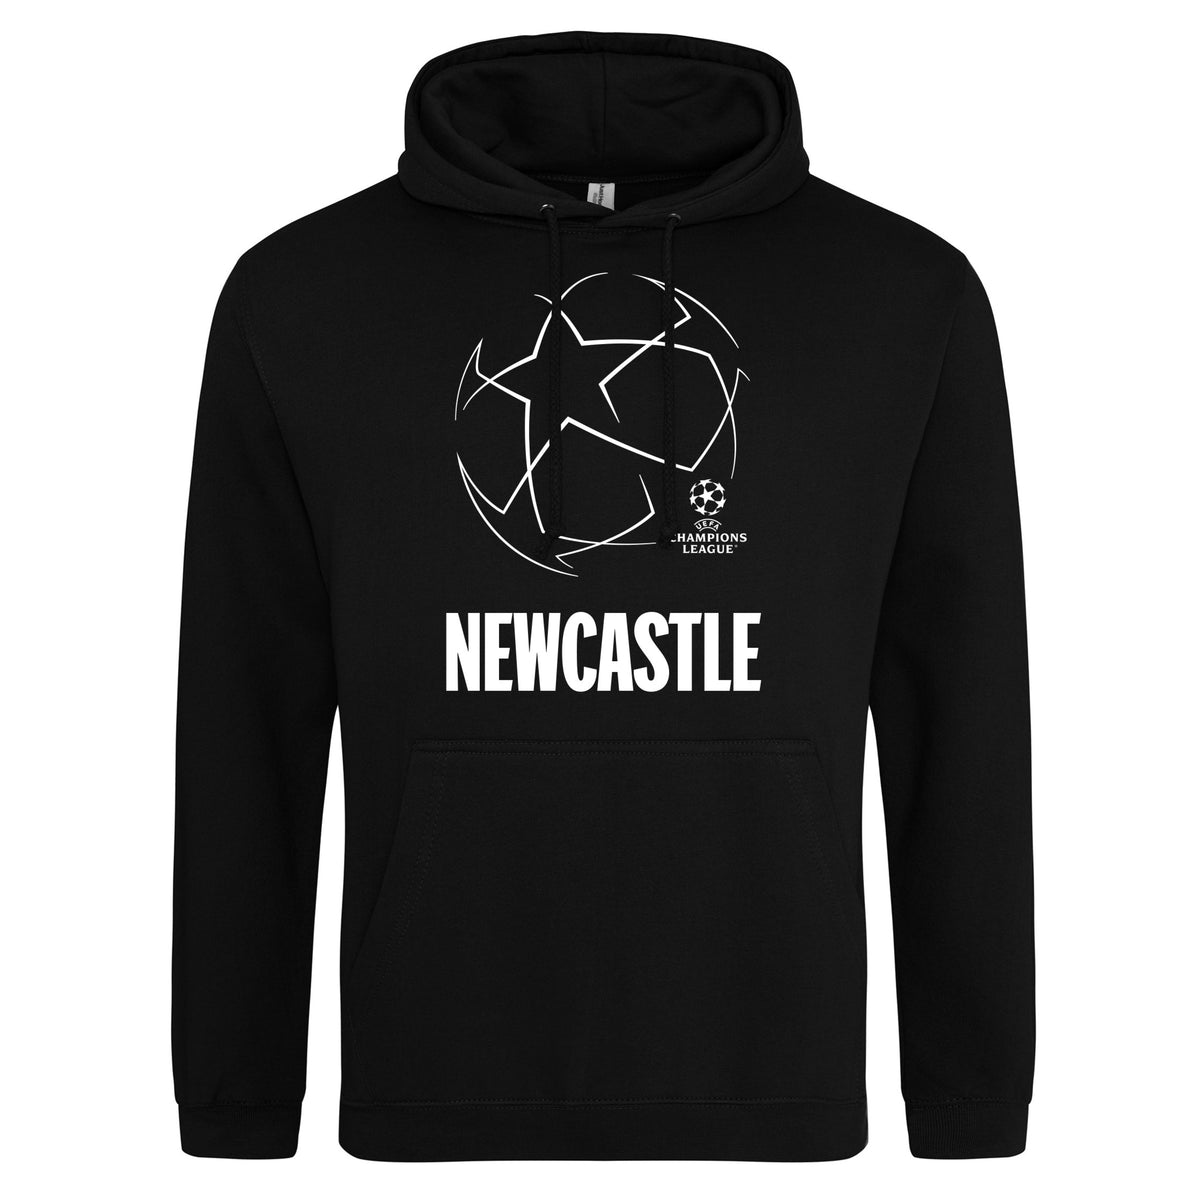 Champions League Starball Newcastle City Hoodie Black